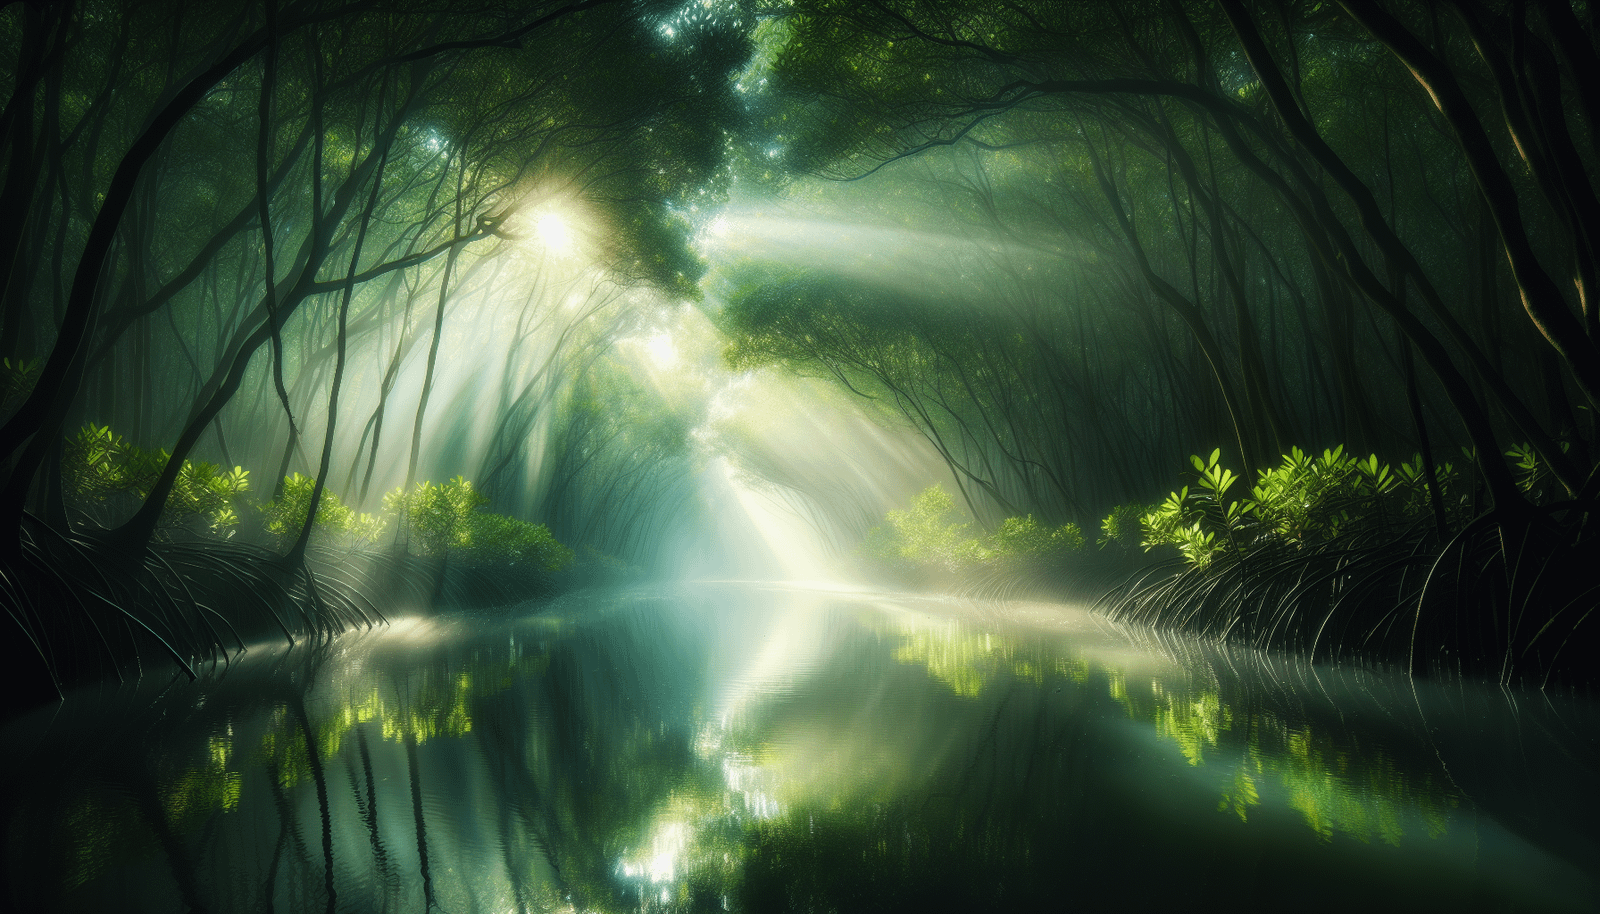 A serene mangrove tunnel with sunlight filtering through the trees